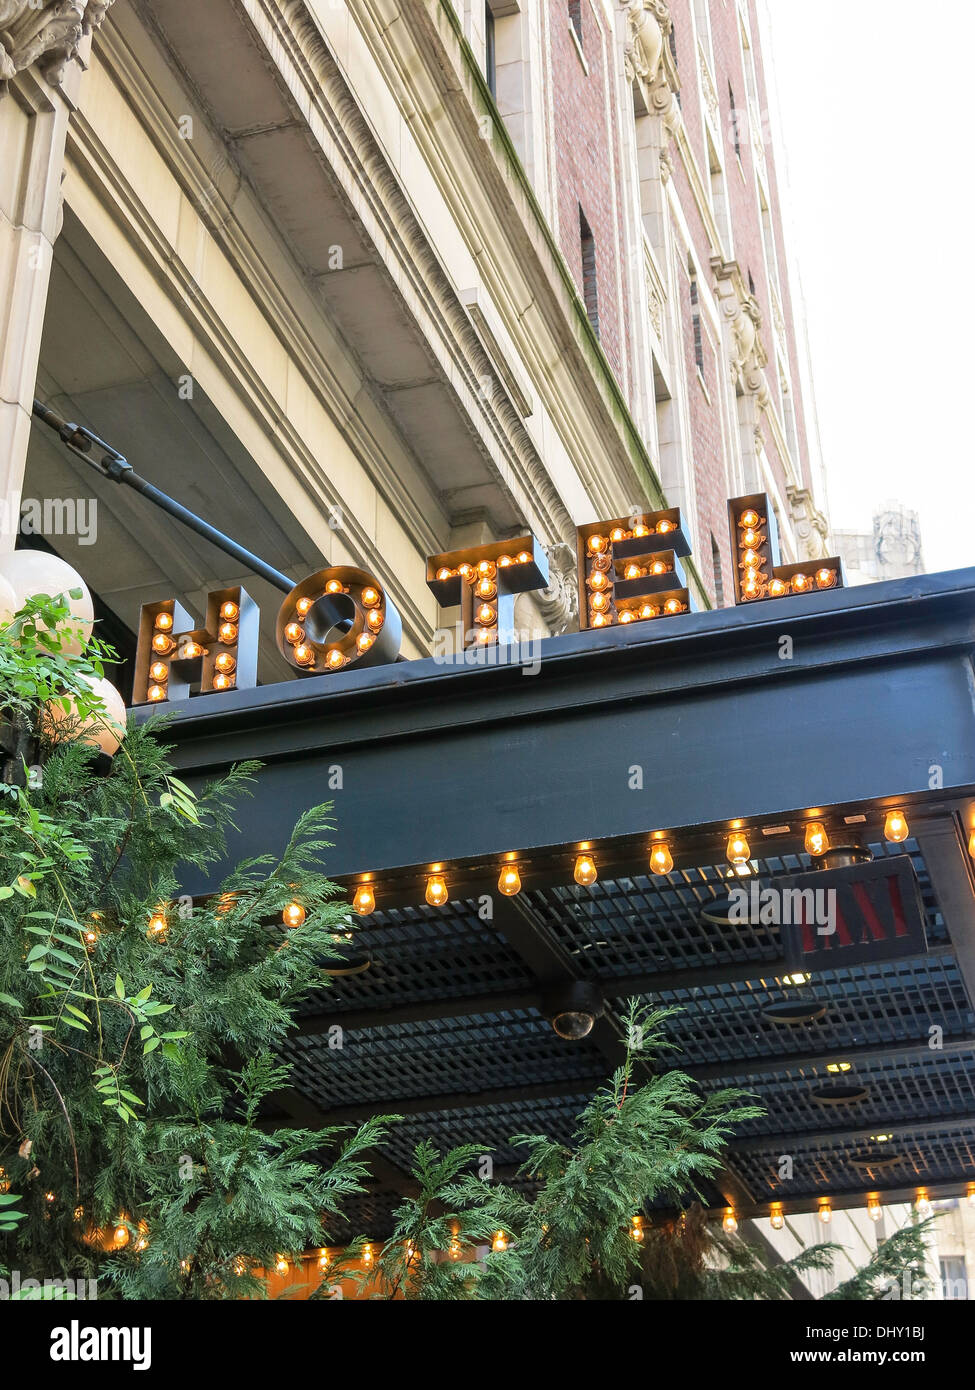 Ace Hotel Marquee, 20 West 29th Street, Chelsea, NYC Stock Photo - Alamy